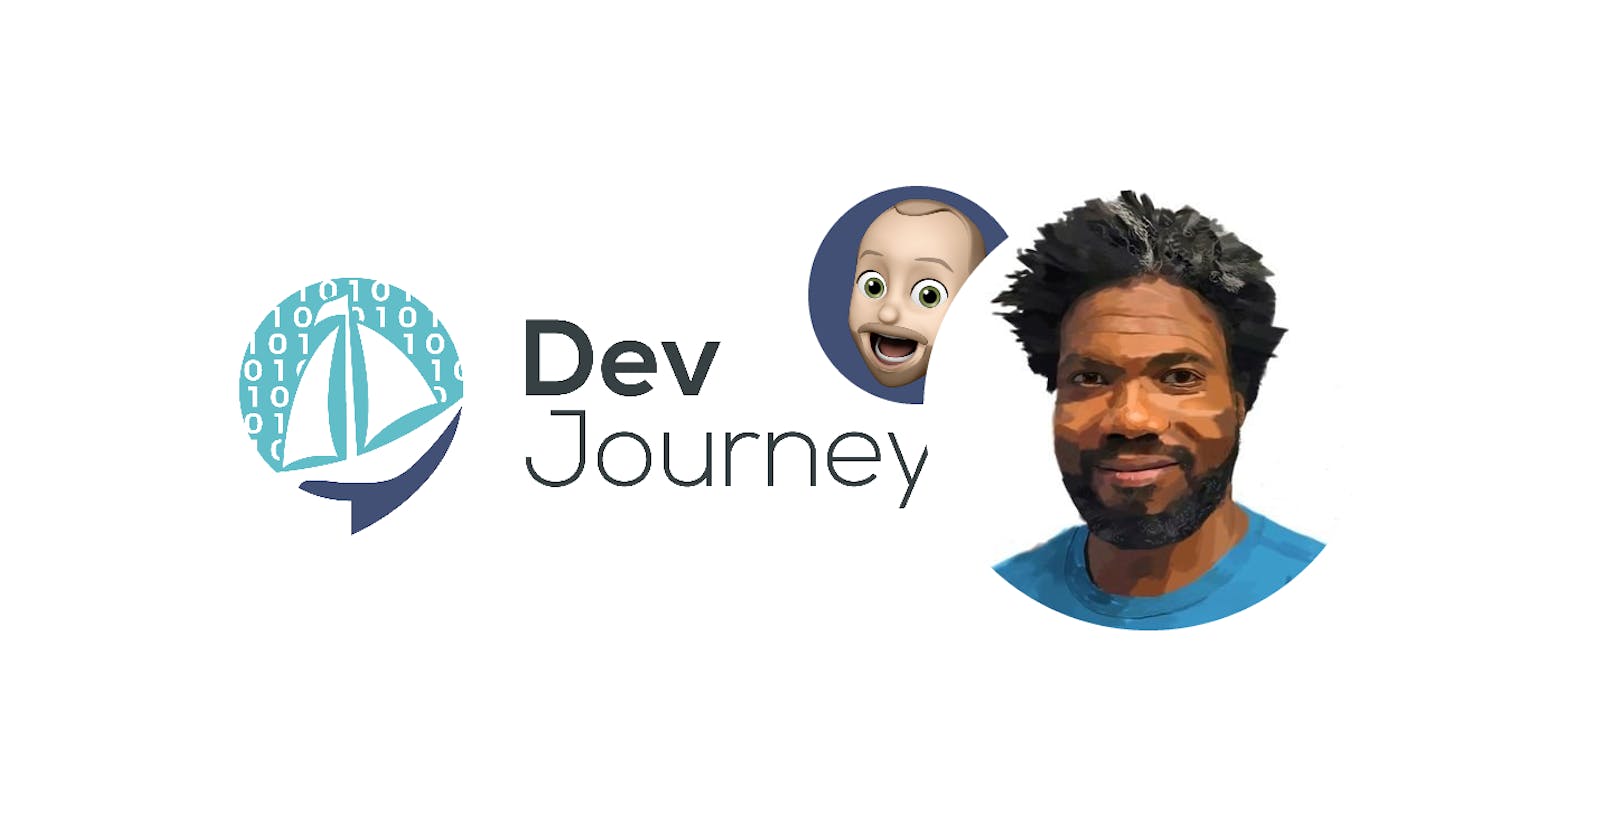 Wesley Faulkner is a native developer advocate... and other things I learned recording his DevJourney (#131)